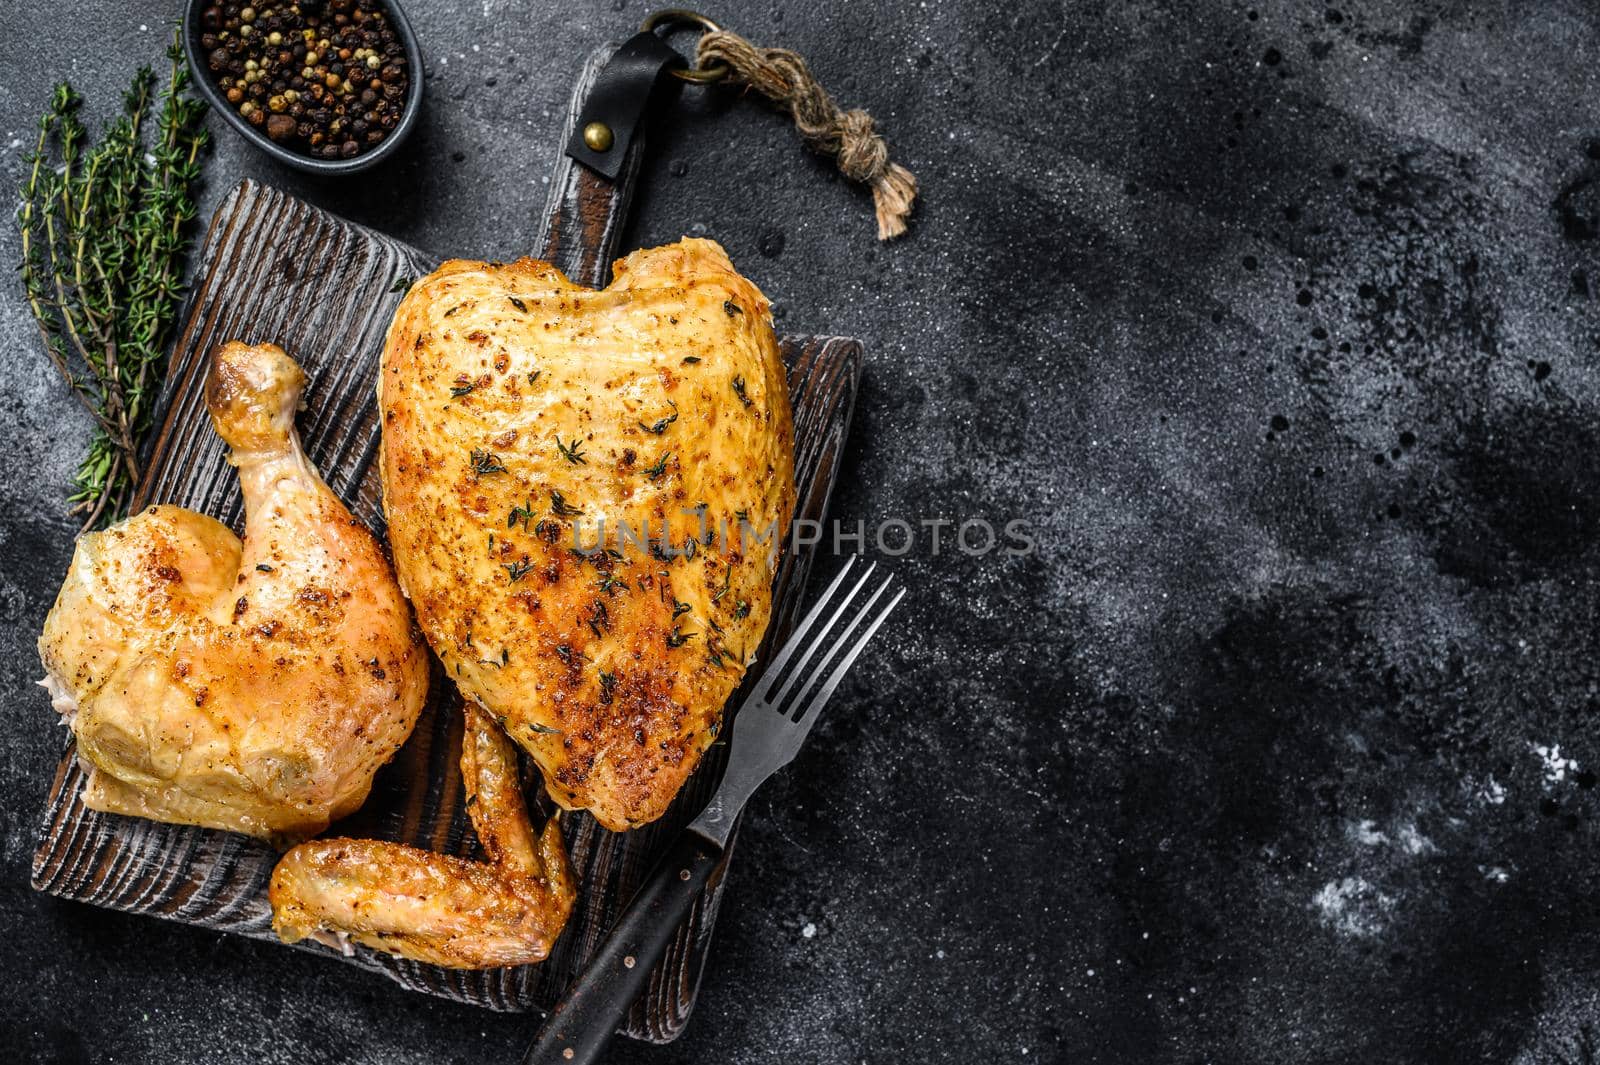 Butchered grilled whole chicken. Black background. Top view. Copy space.